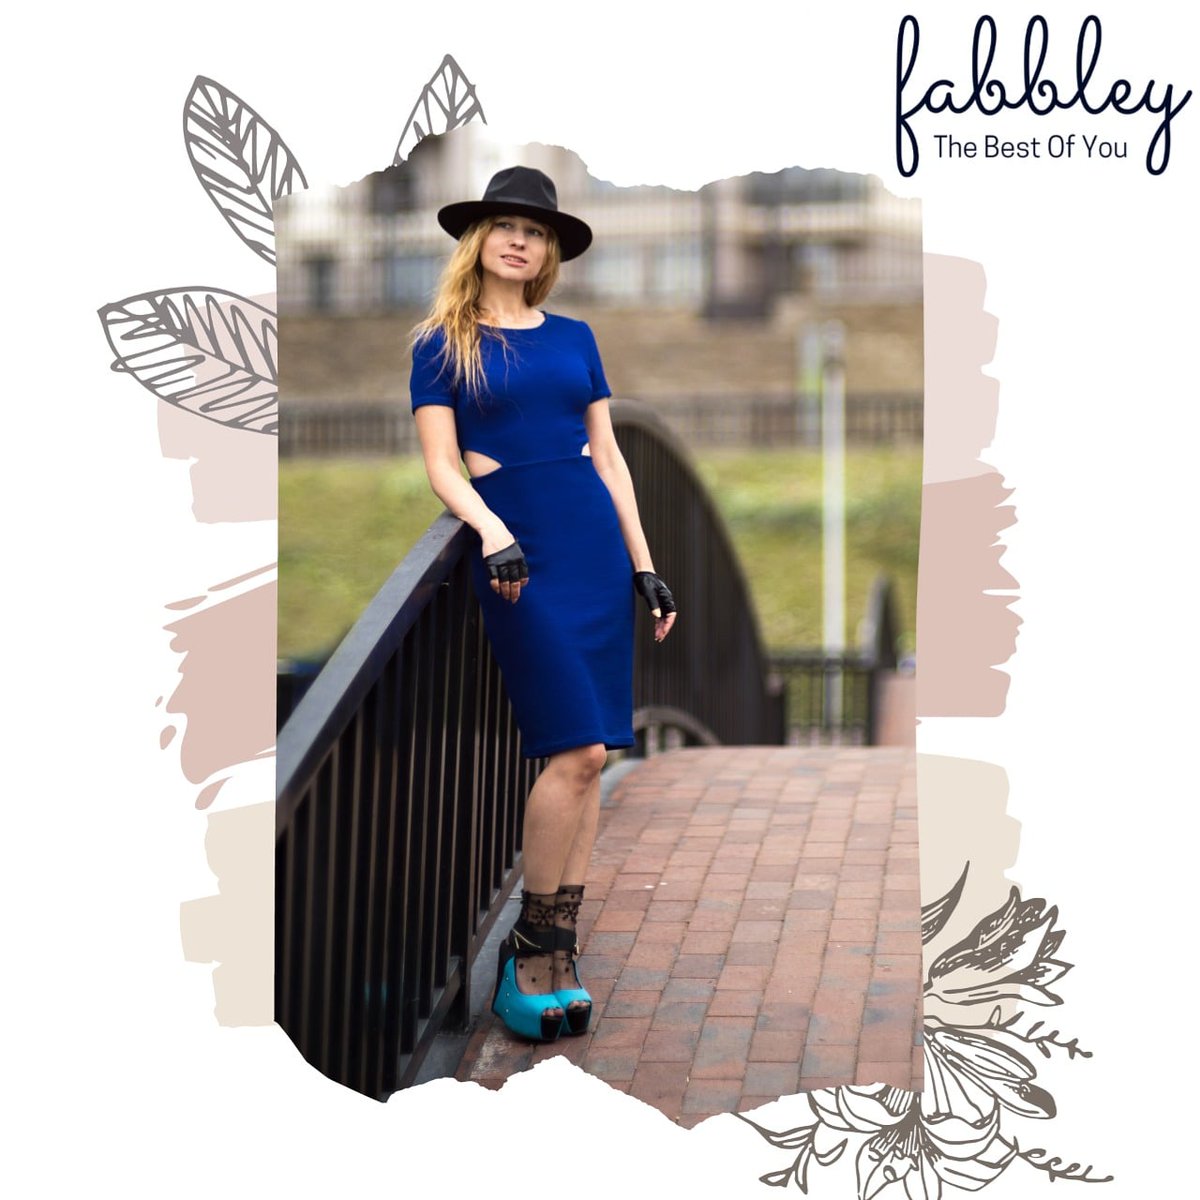 Life is Short Make Every Style Count

Fabbley Launching Soon In India

#fashionstyle #instastyles #stylegram #bloggerstyle #stylefile #instastyle #streetstyle #weddingstyle #luxurystyle #celebstyle #fabbley #FabbleyIndia #fabbleyfashion #fashionIndia #stylecounts #travel #style